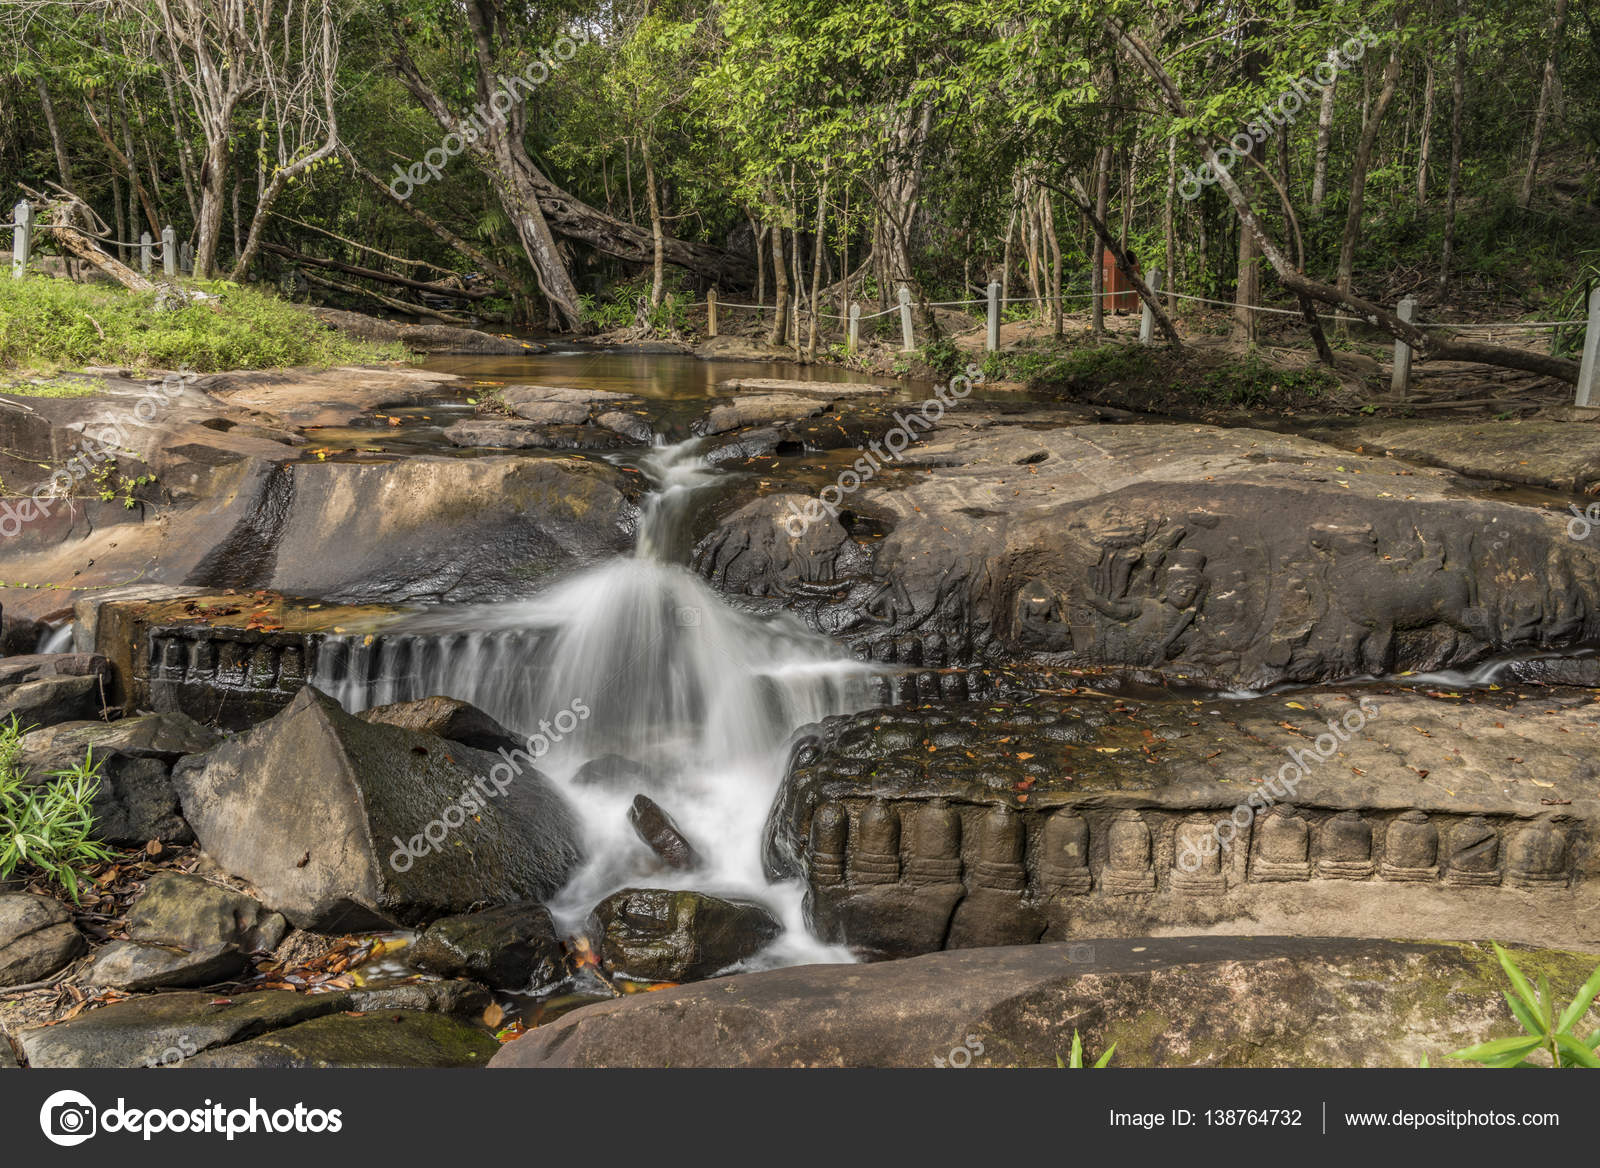 Kbal Spean and jungle in Cambodia mountains Stock Photo